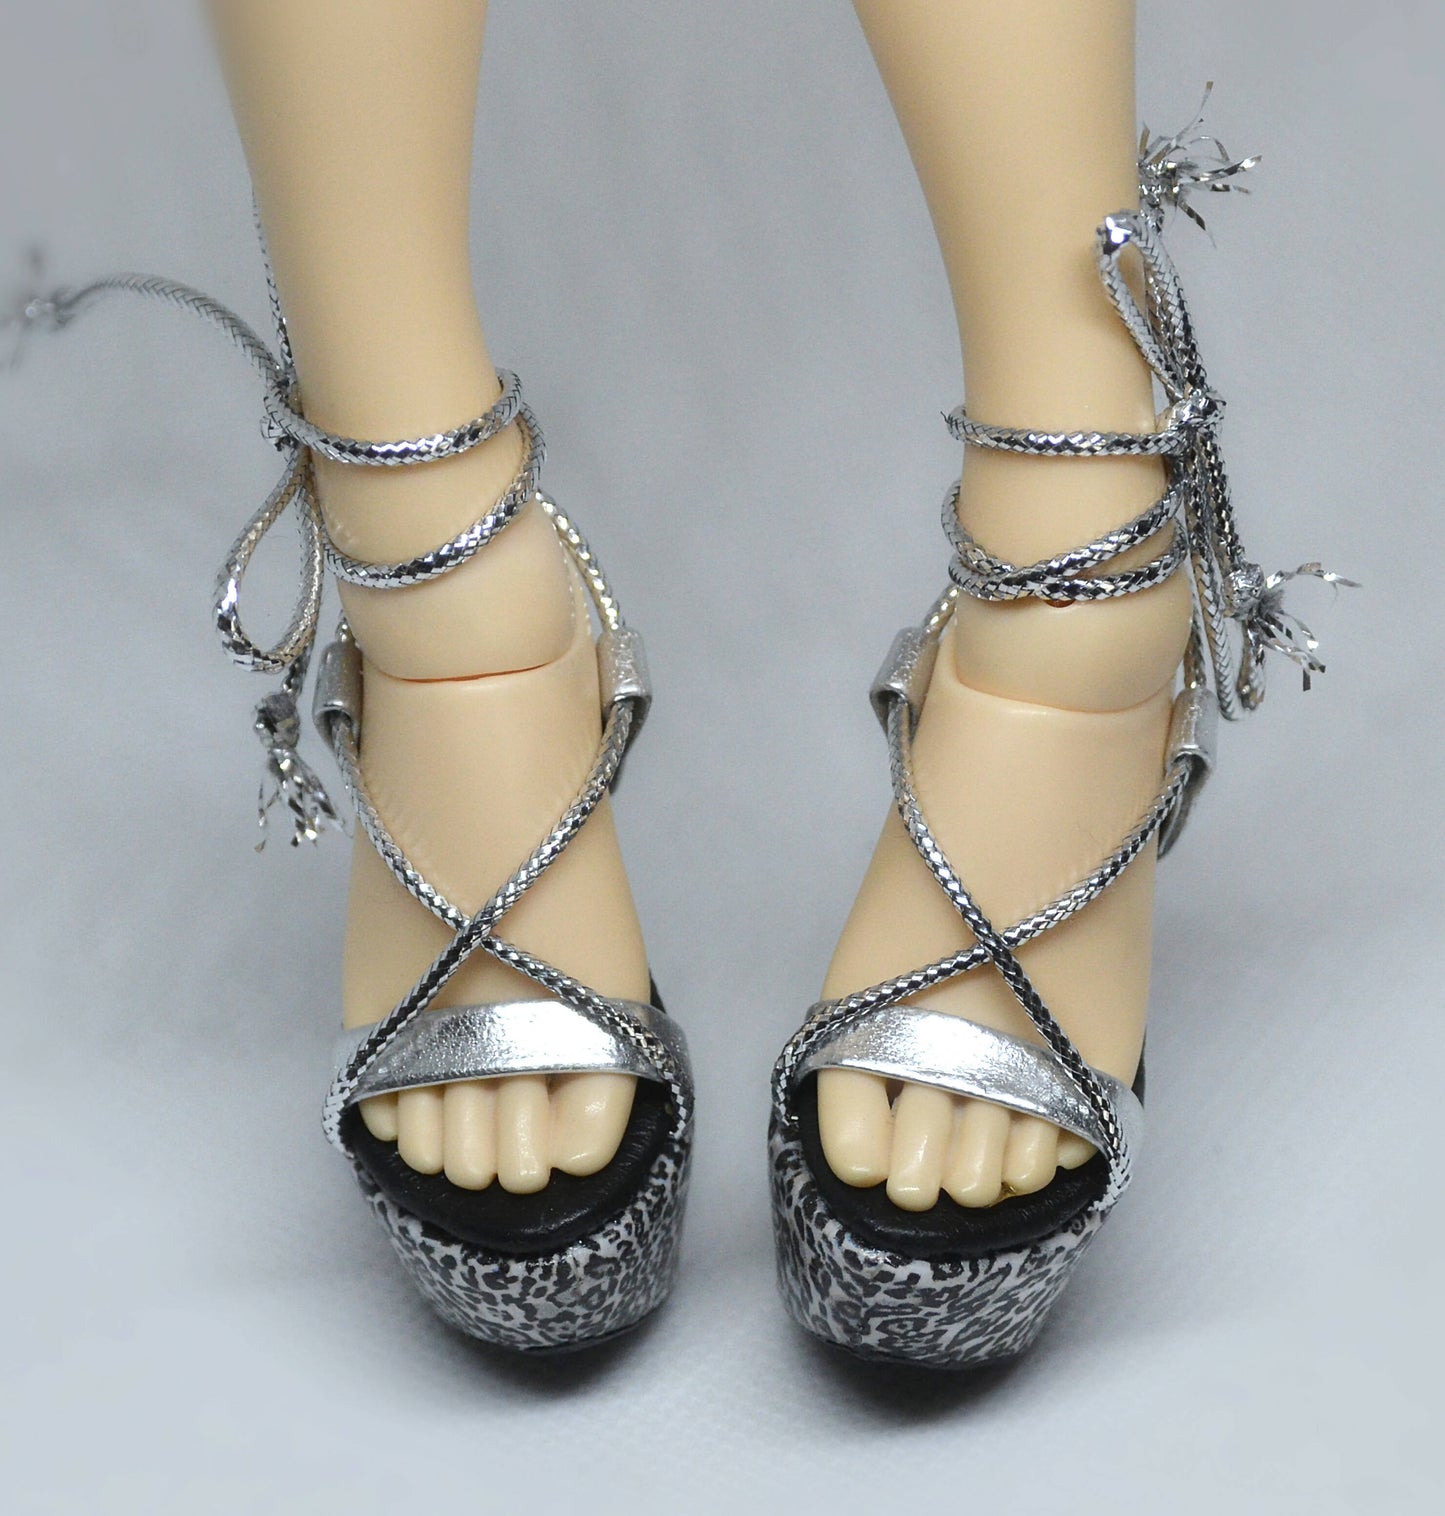 Shoes for MiniFee